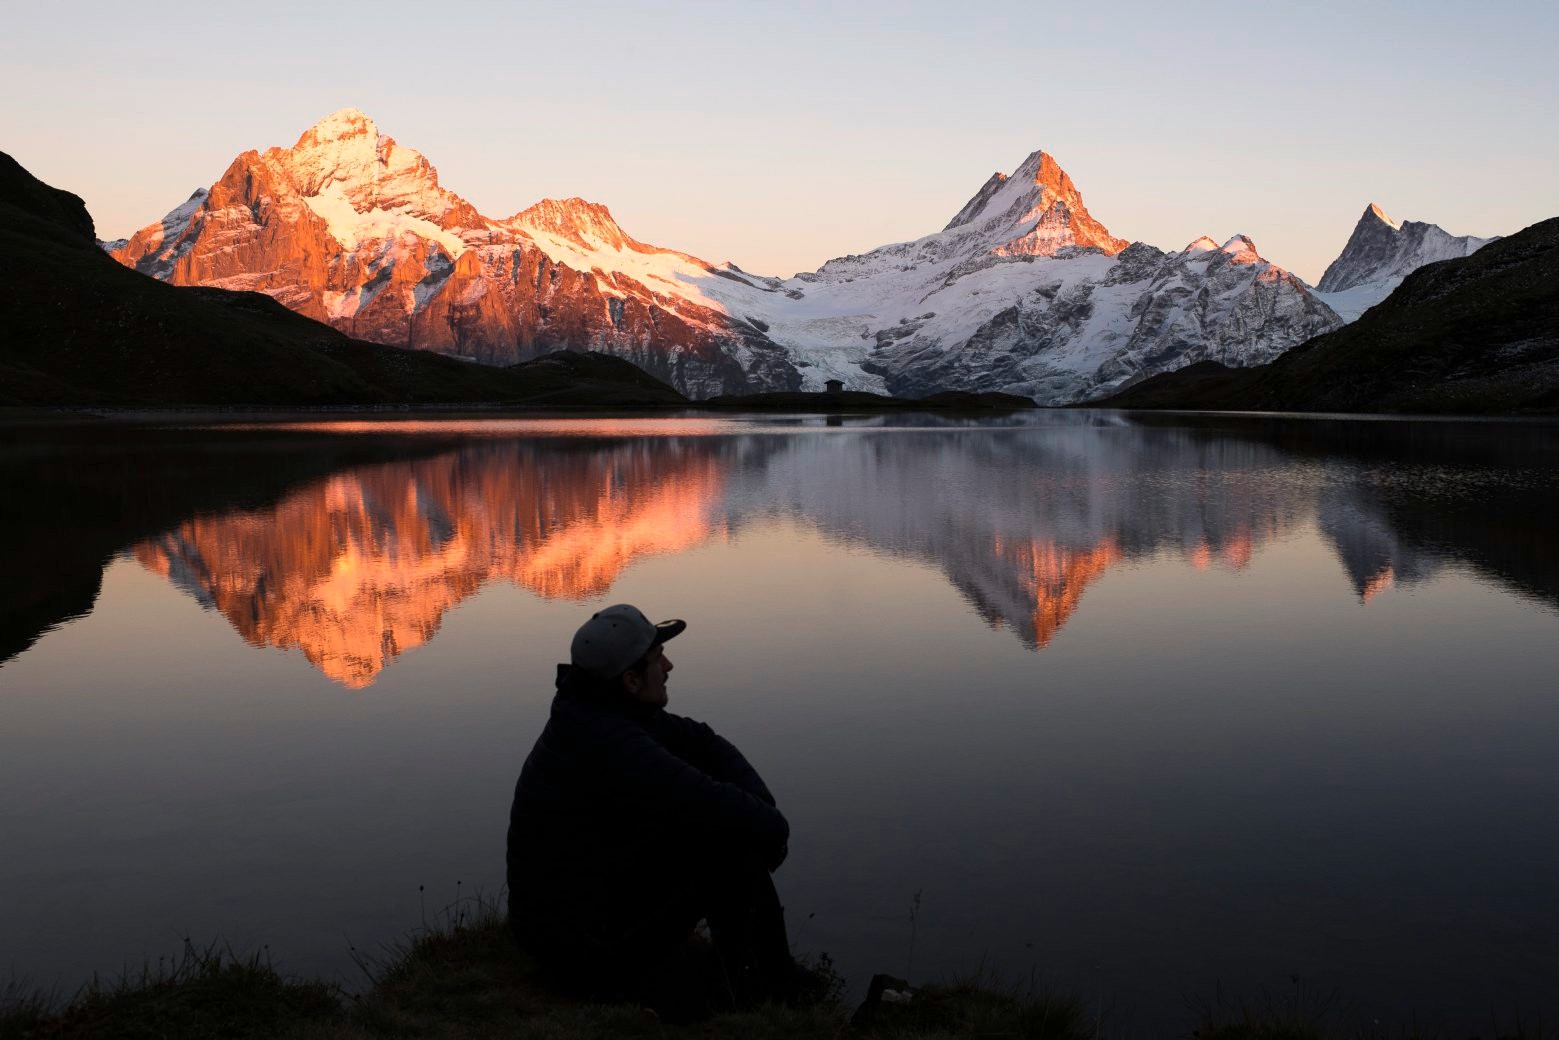 A man looks at the mountains Wetterhorn, Lauteraarhorn, Schreckhorn and Finsteraarhorn that are reflecting during the sunset in the Bachalpsee lake (2265m) close to the First, above Grindelwald in the Bernese Oberland, Switzerland, on Monday, October 3, 2016. (KEYSTONE/Anthony Anex) SWITZERLAND SUNSET ALPS GRINDELWALD